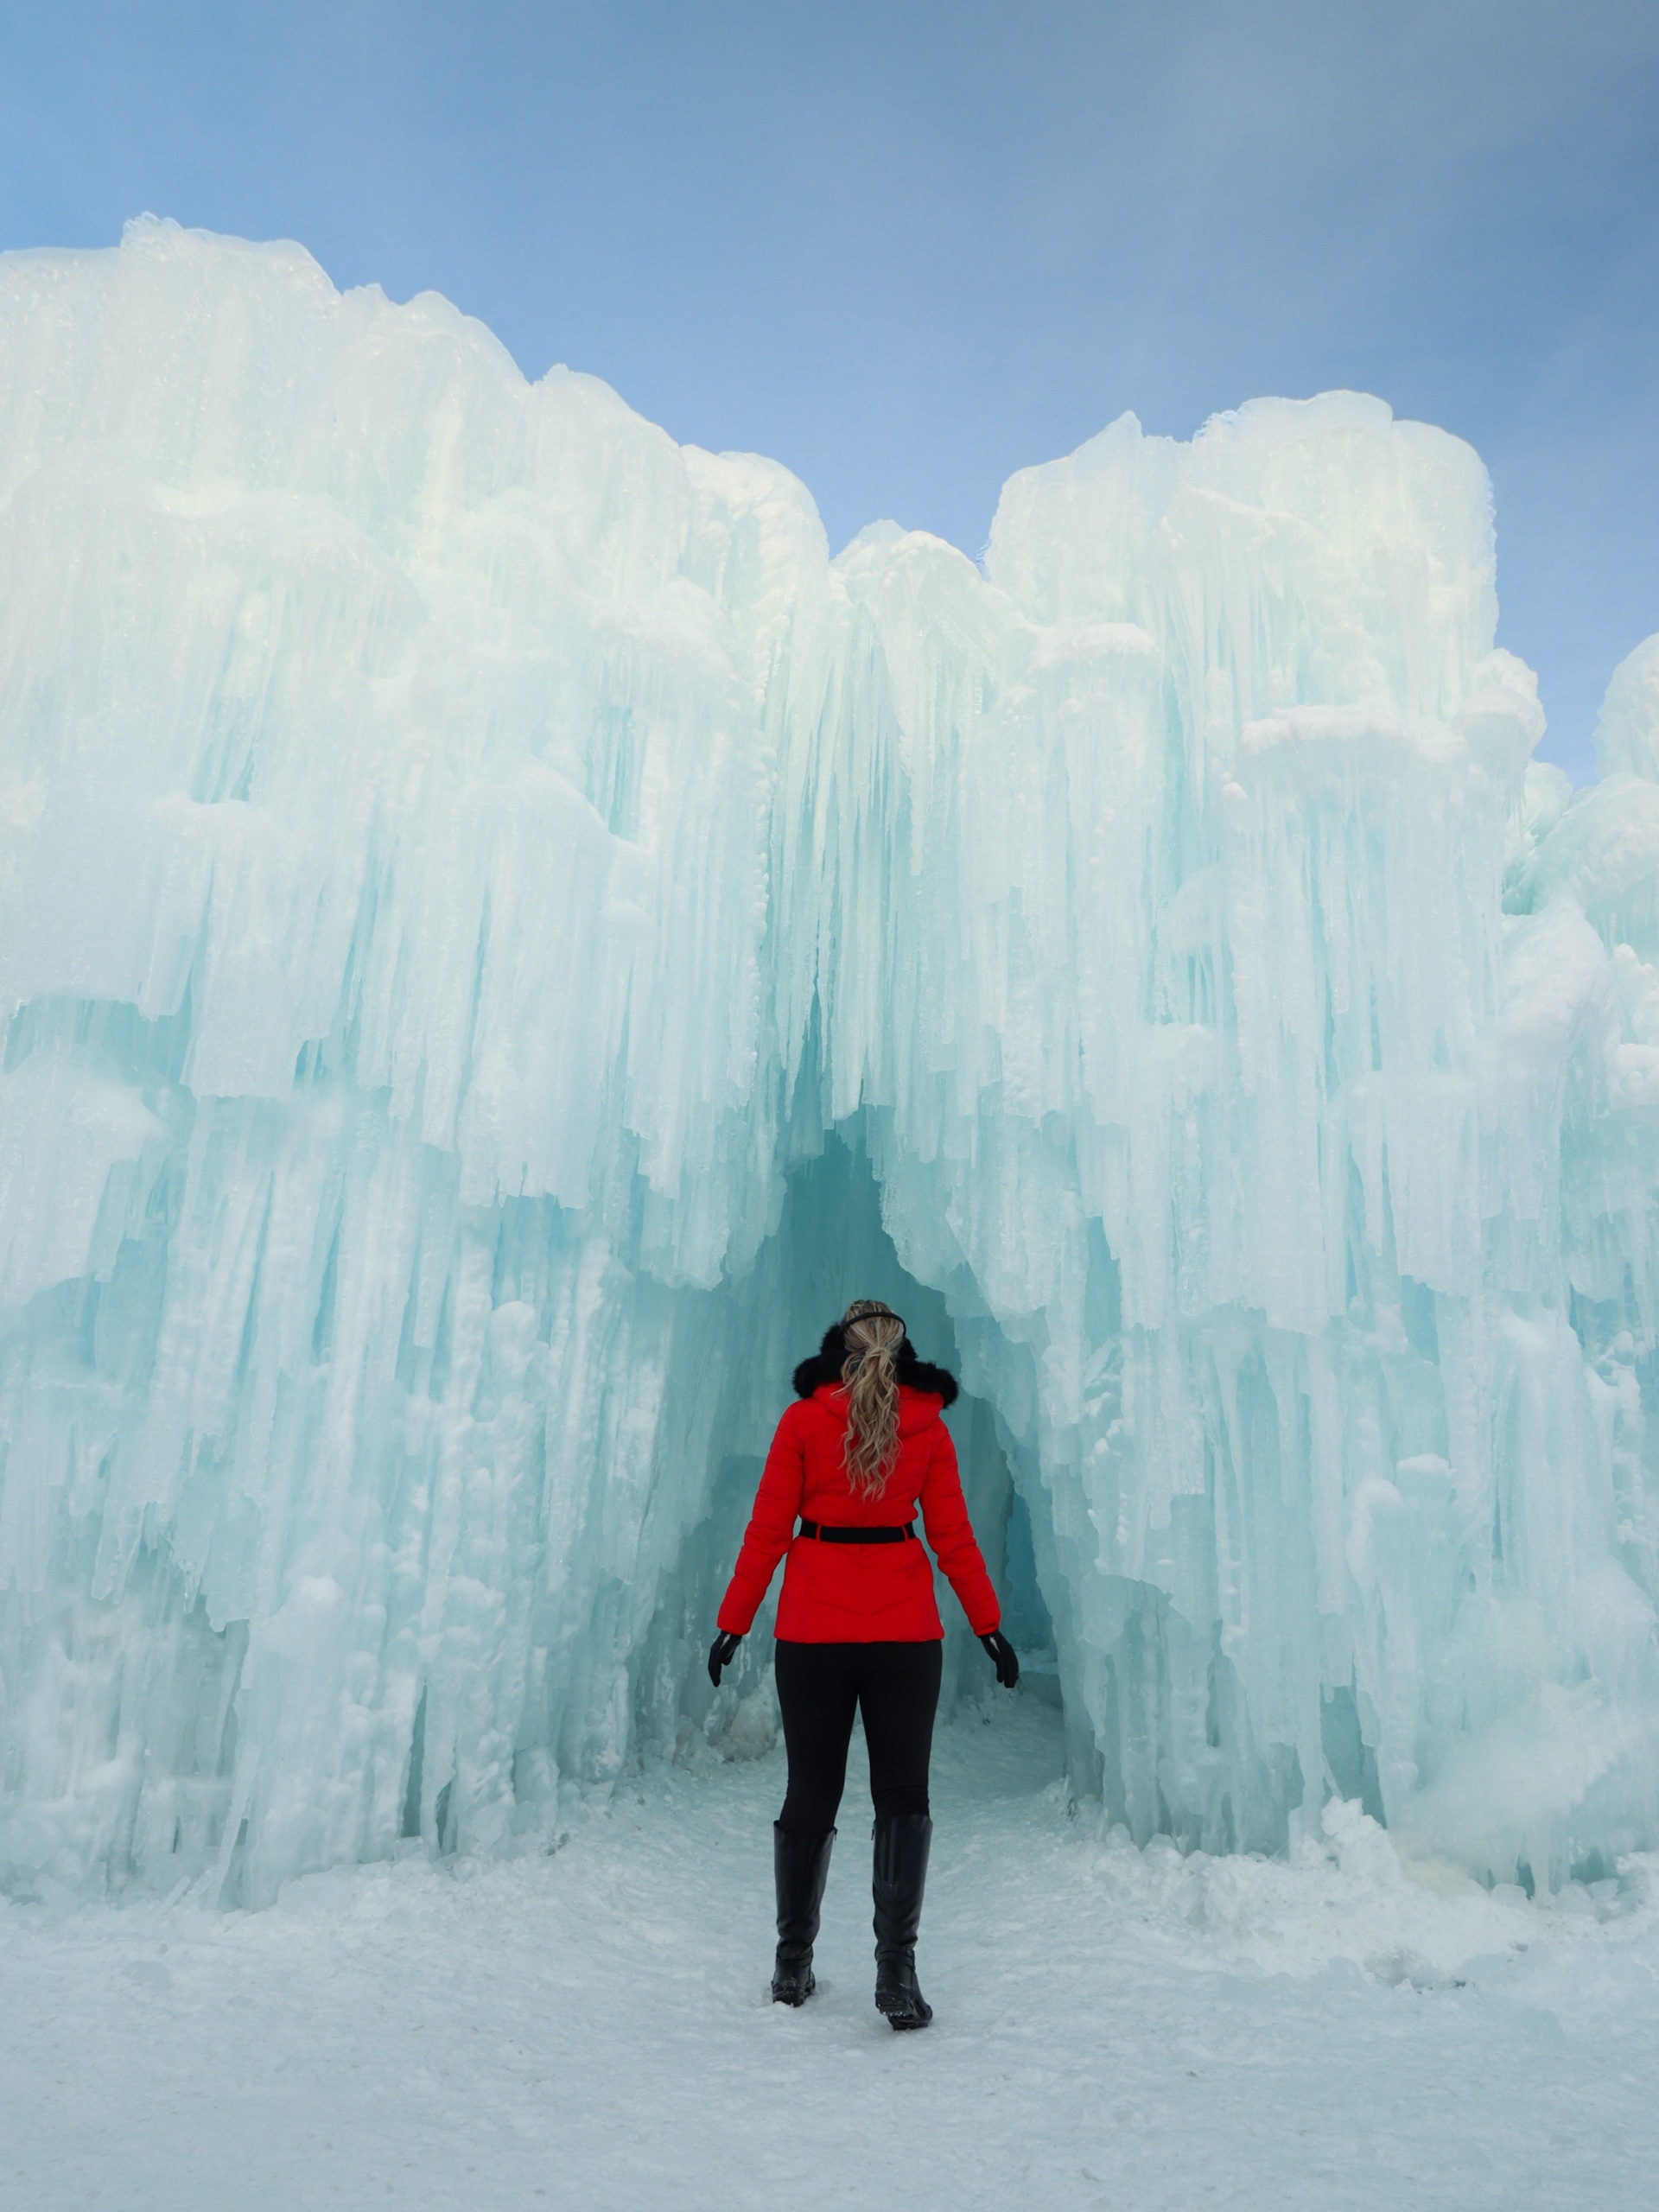 visiting the ice castles